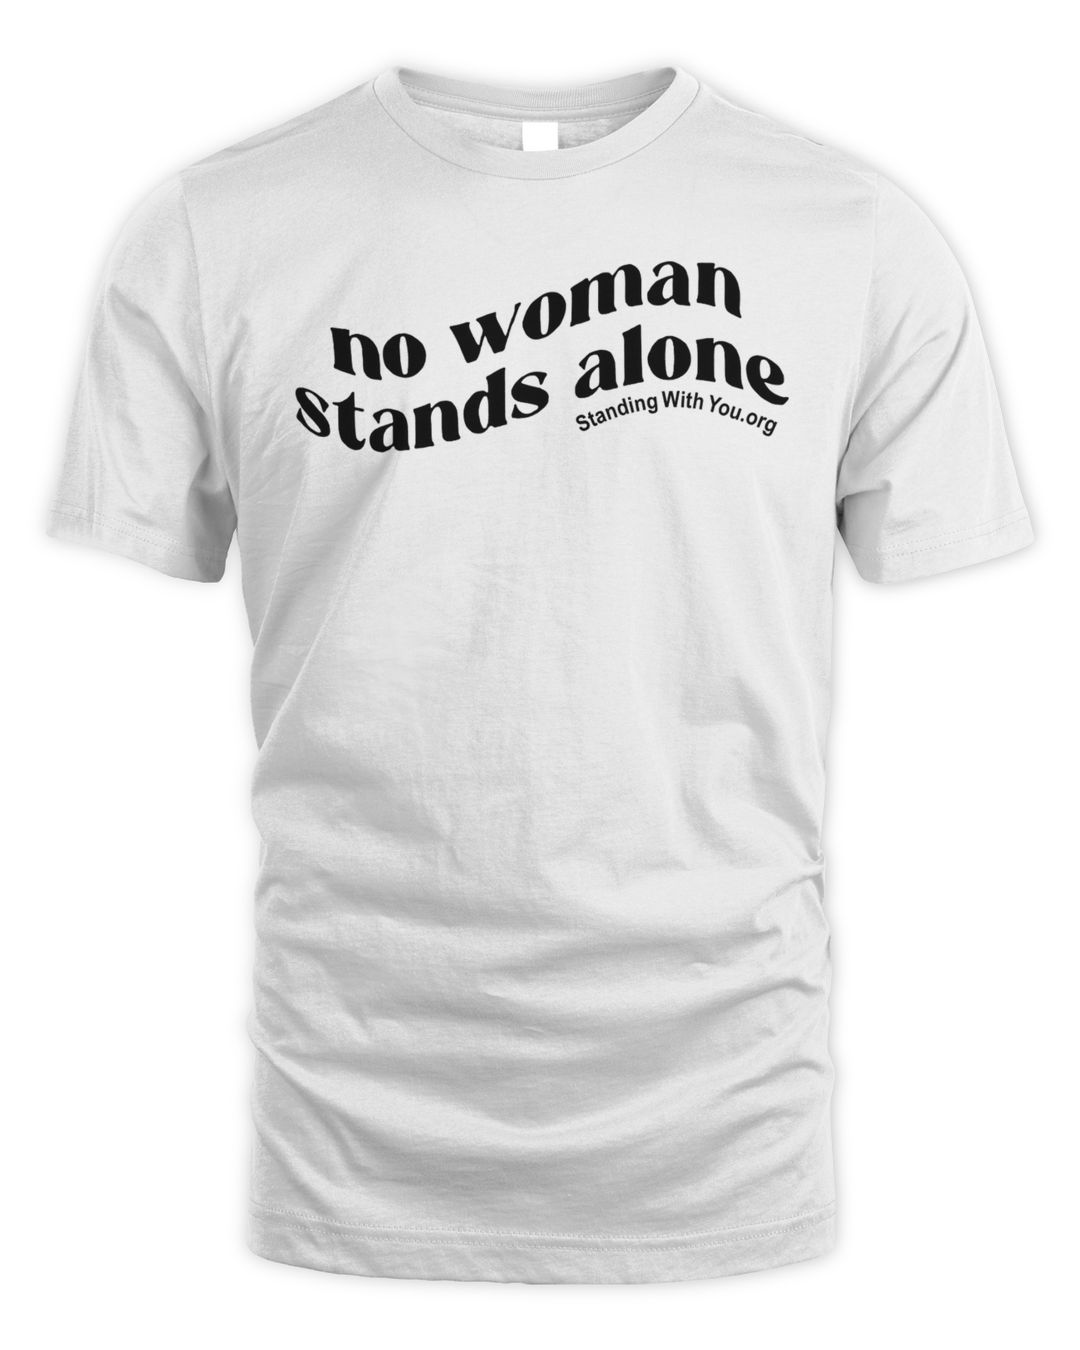 No Woman Stands Alone T-Shirt